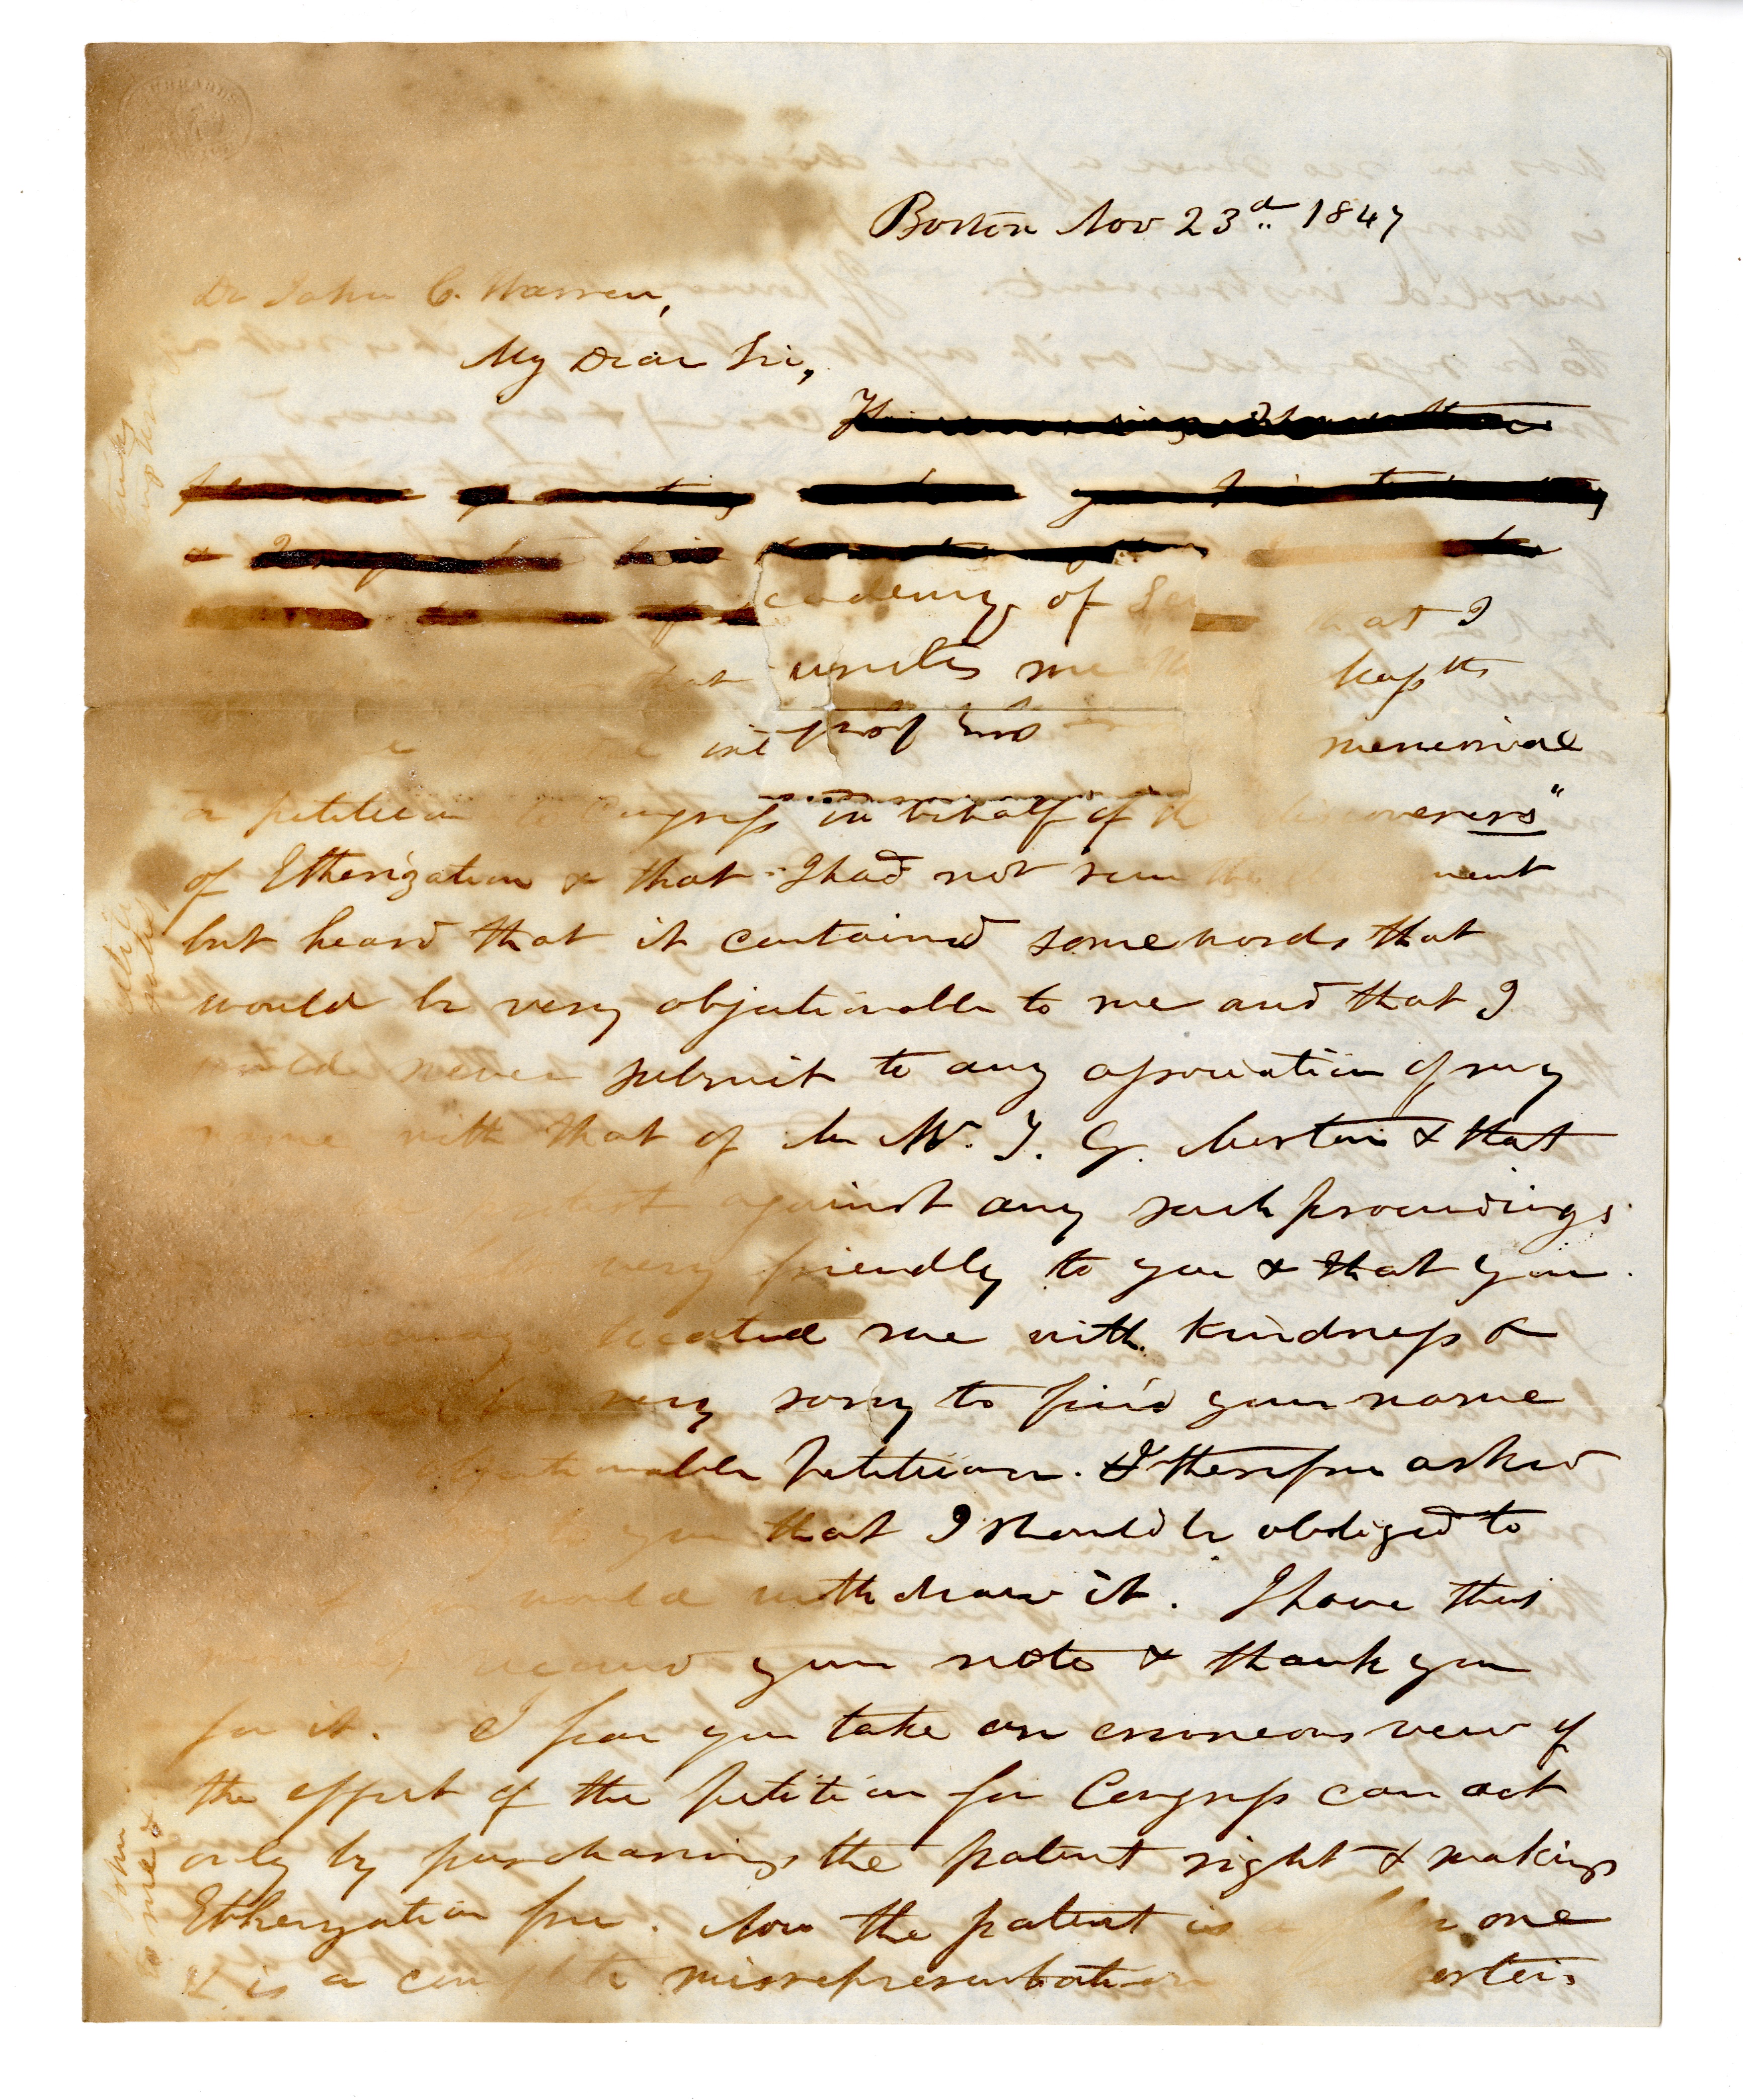 scan of manuscript letter from 1847